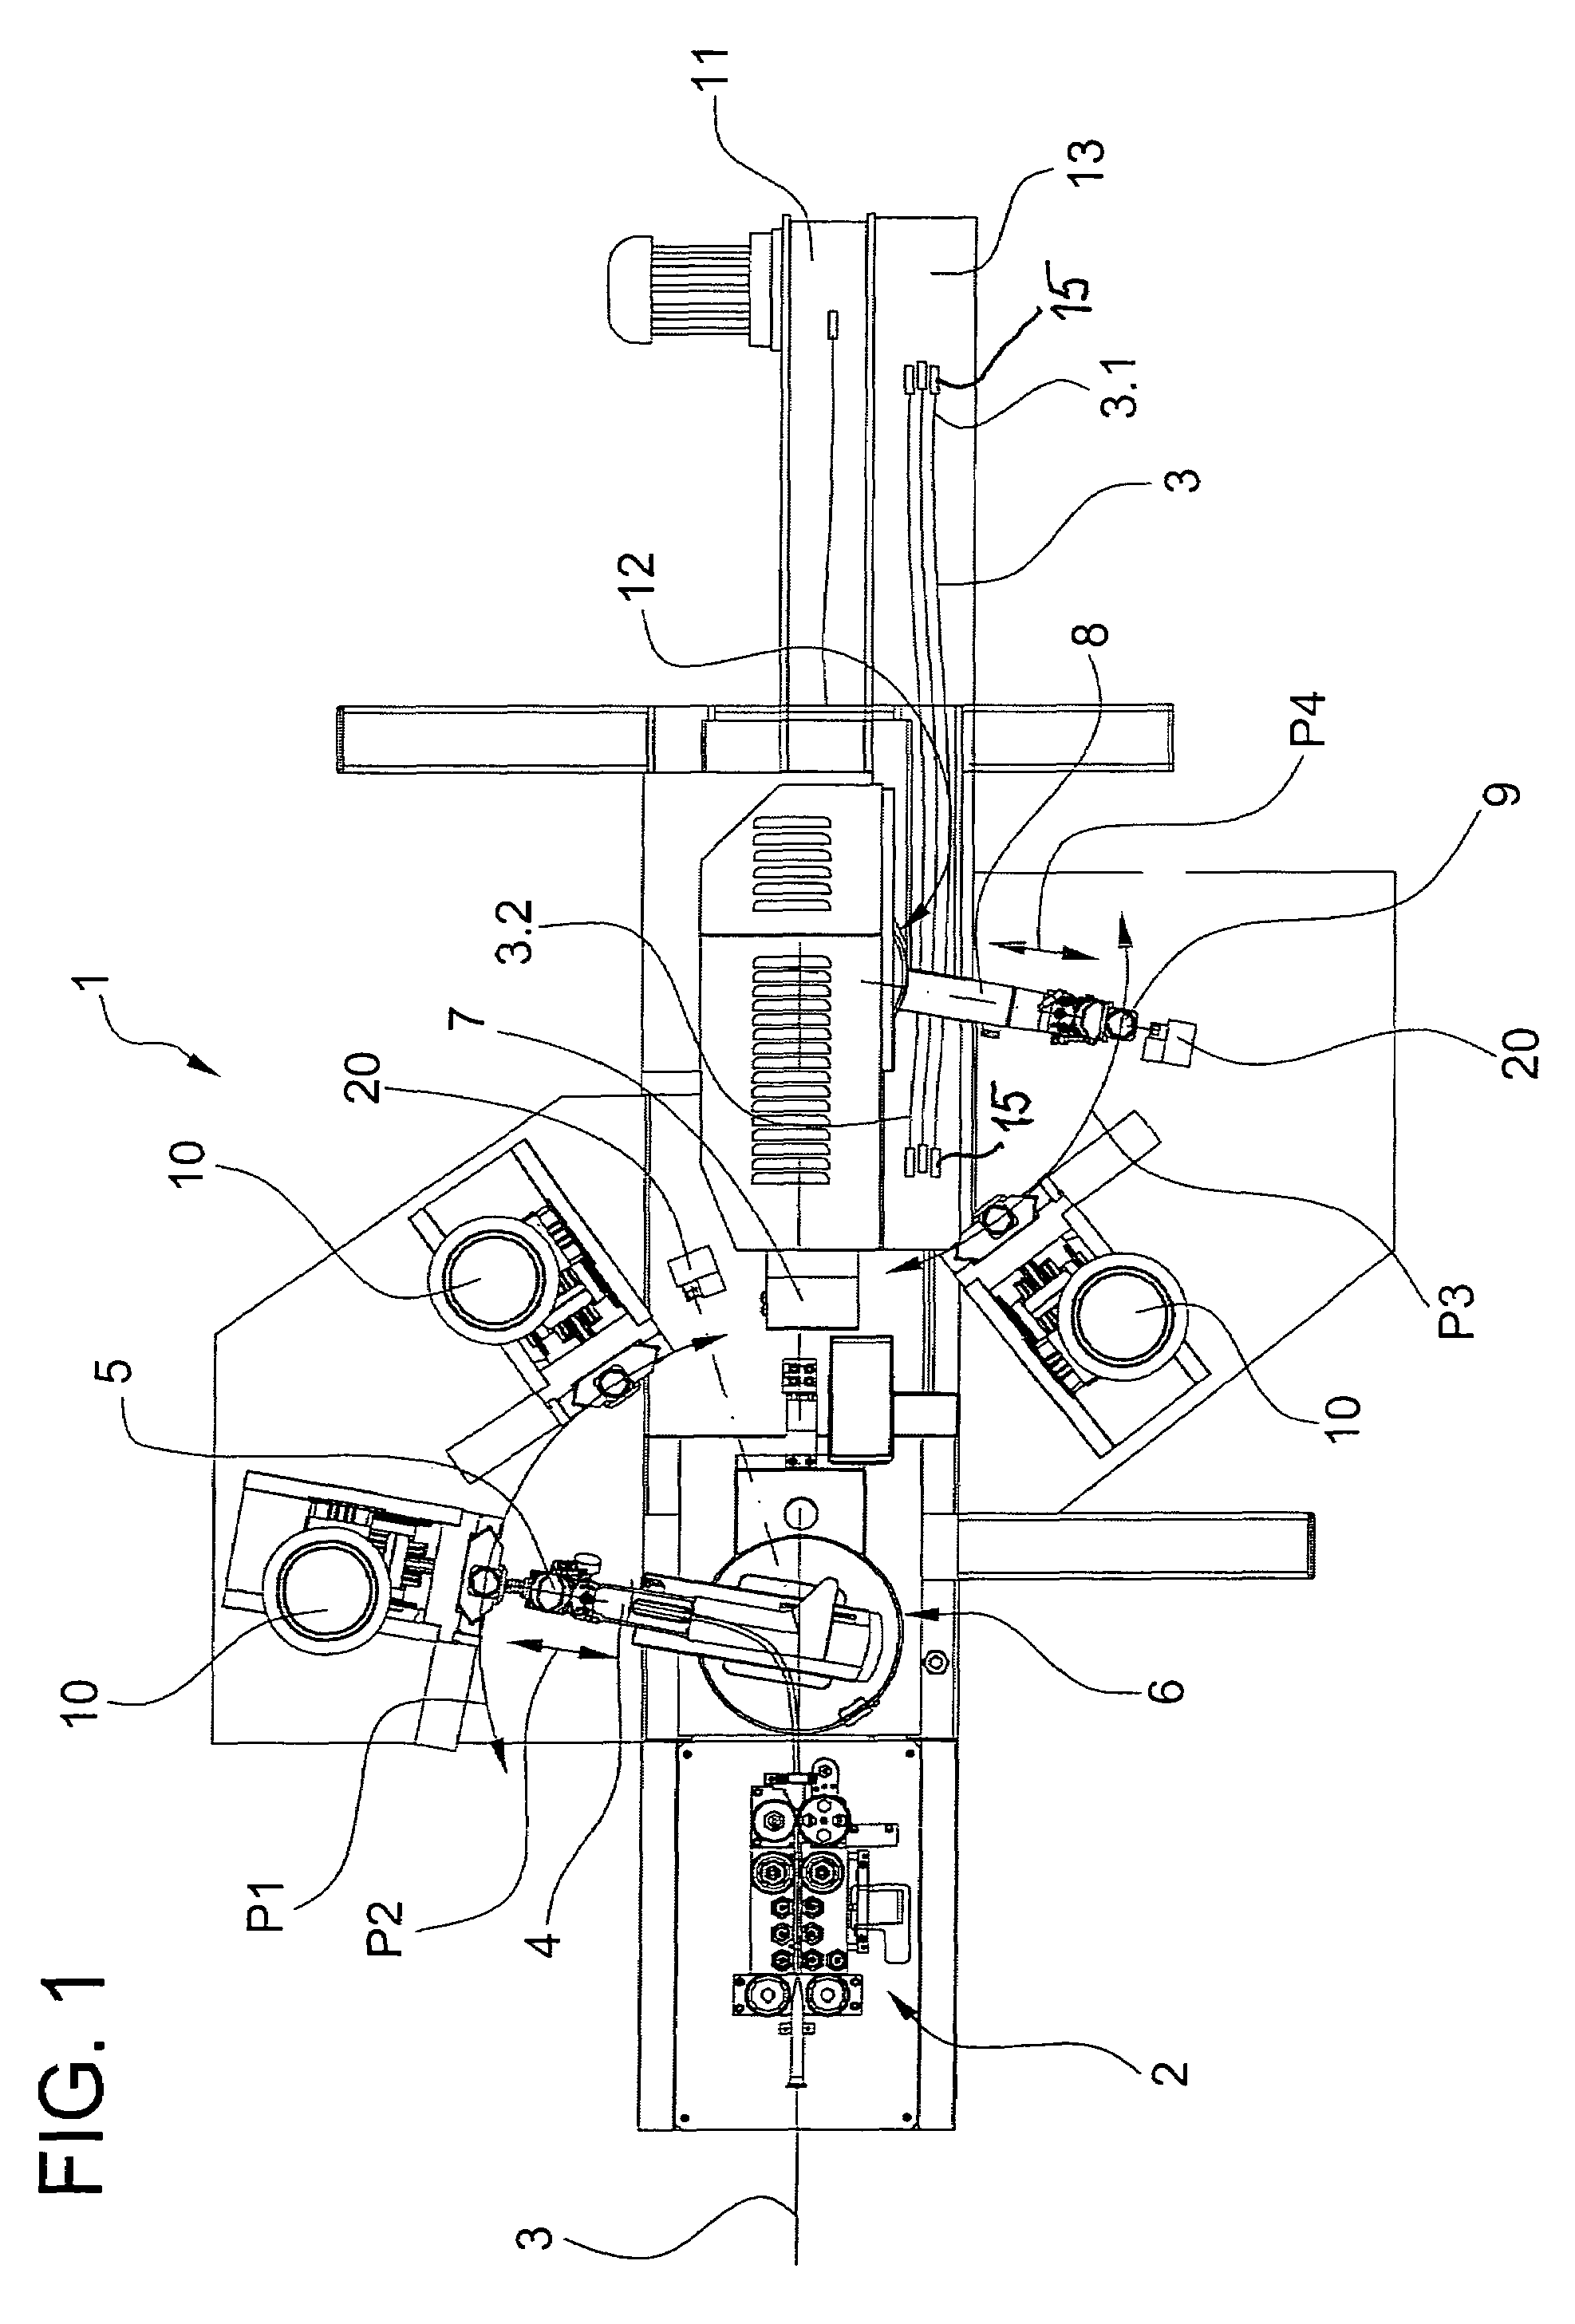 Inspection apparatus for wire-processing machine